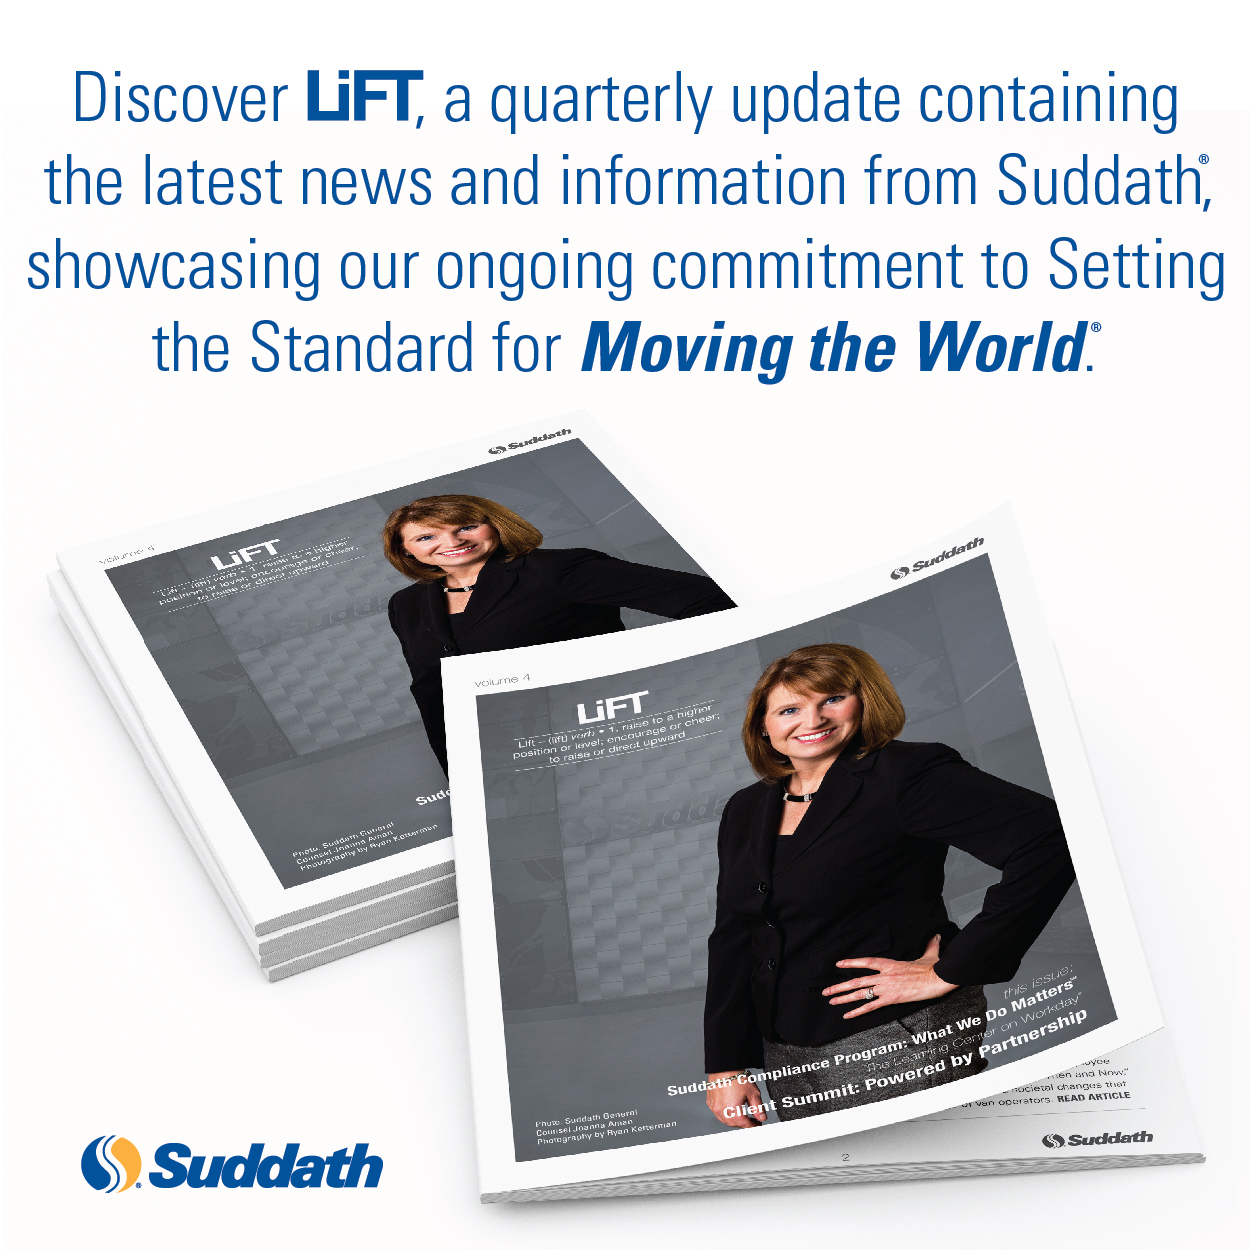 LiFT, a quarterly update from Suddath